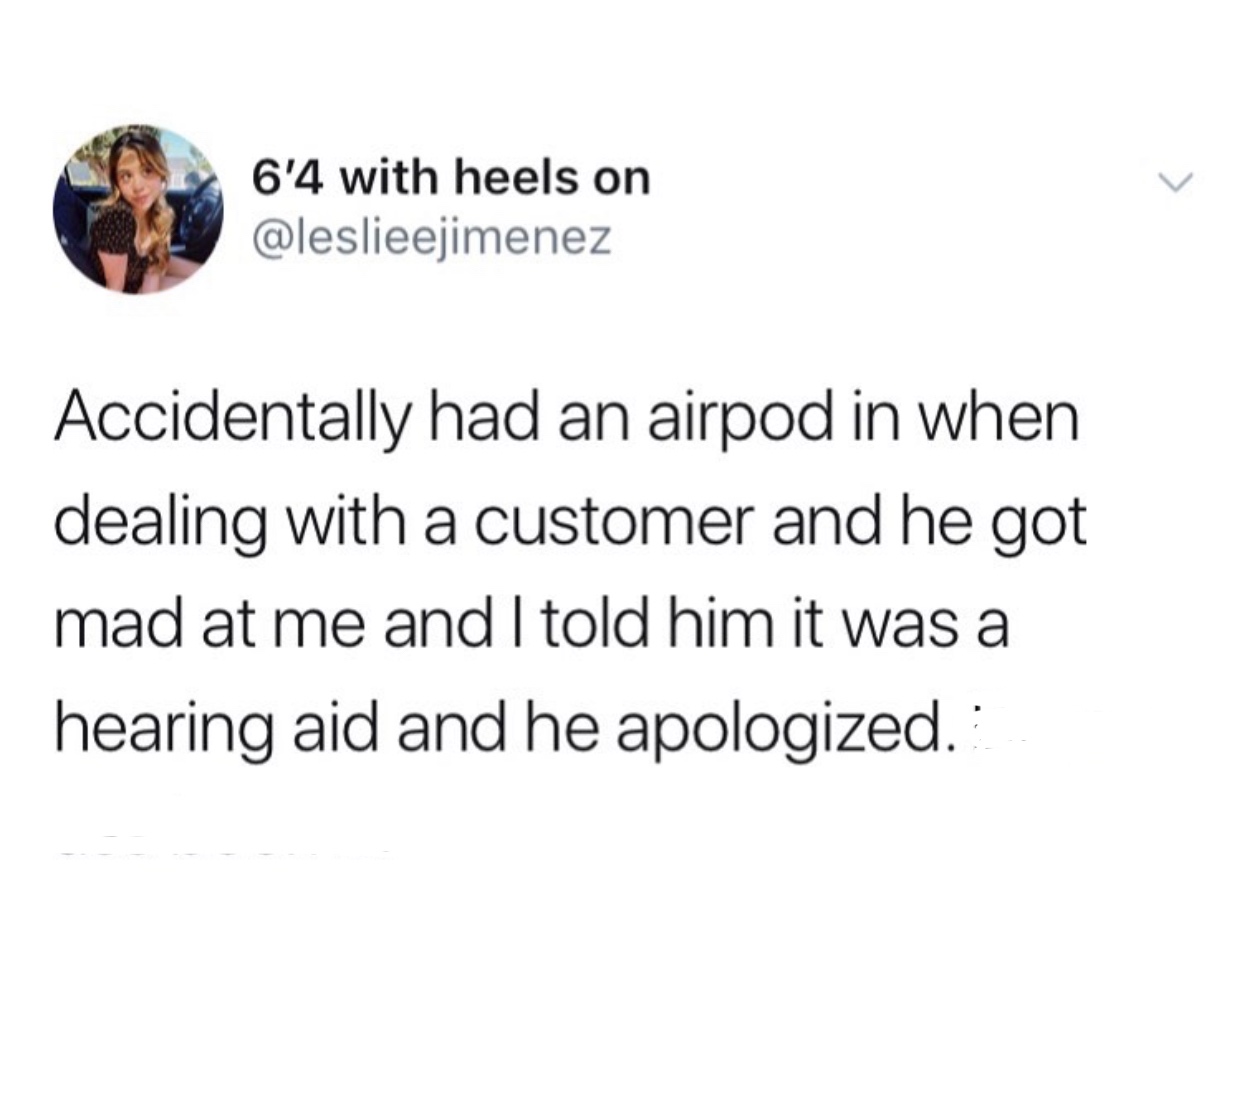 cardiovascular whore meme - 6'4 with heels on Accidentally had an airpod in when dealing with a customer and he got mad at me and I told him it was a hearing aid and he apologized.